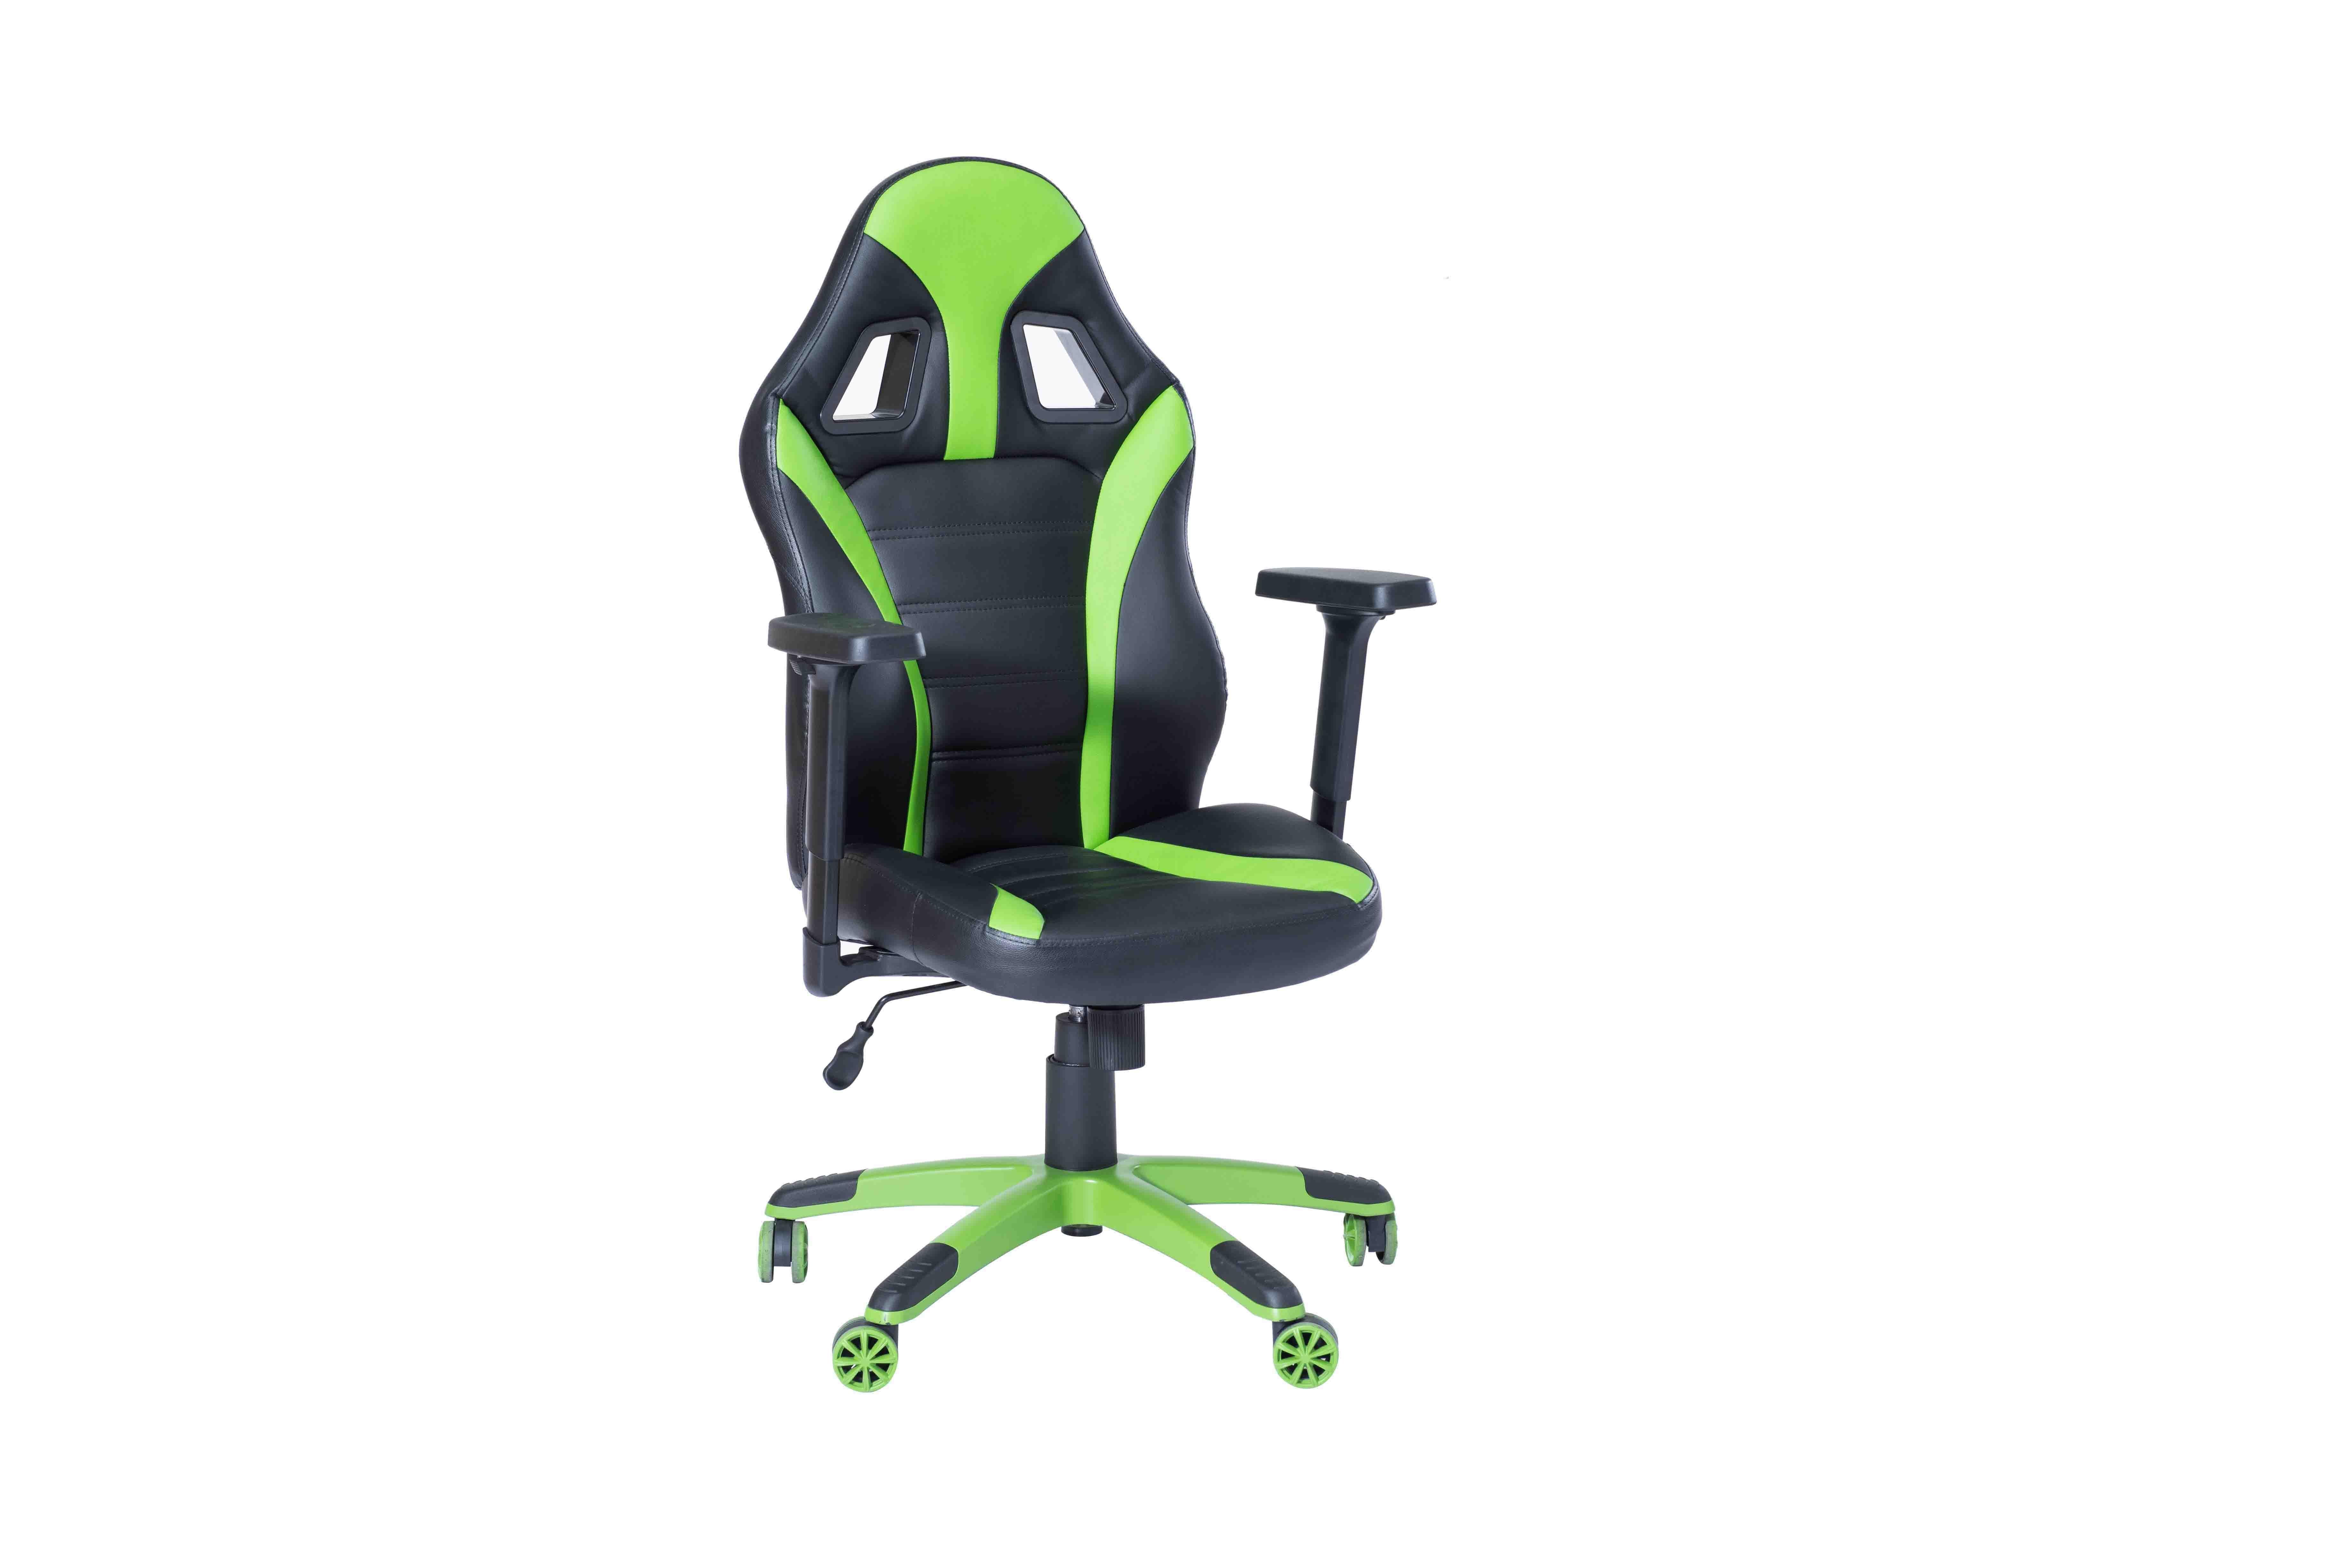  X  Qualifier Racer  Style Gaming  Chair 